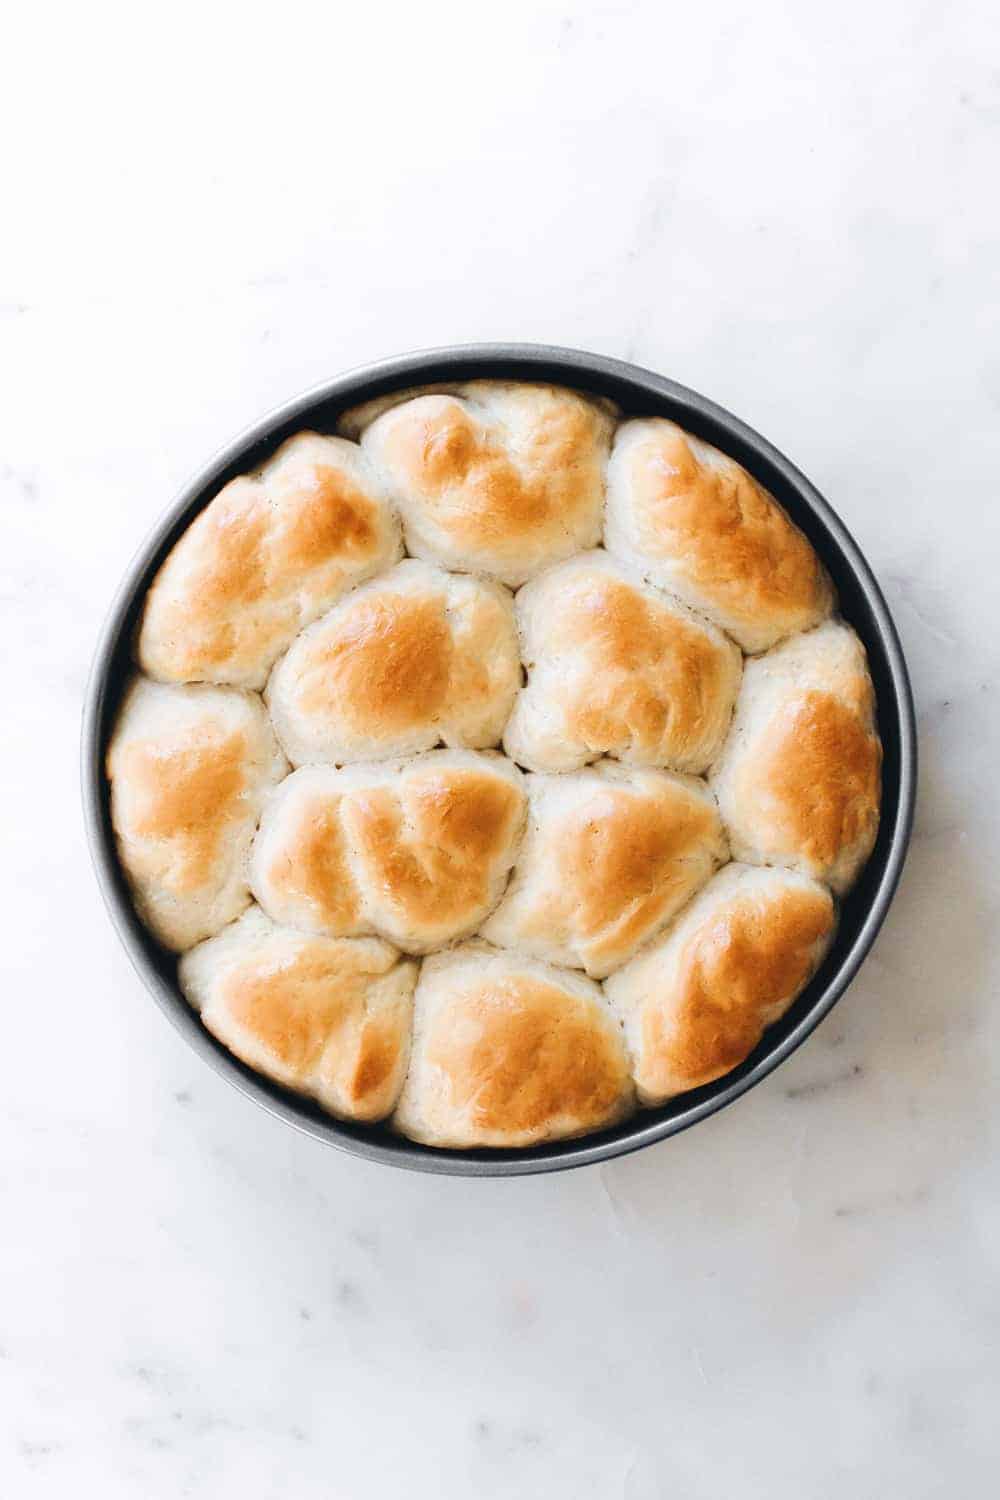 This simple yeast dough is going to become your Go-To Dough for cinnamon rolls and dinner rolls. Or cut the dough in half and make both.